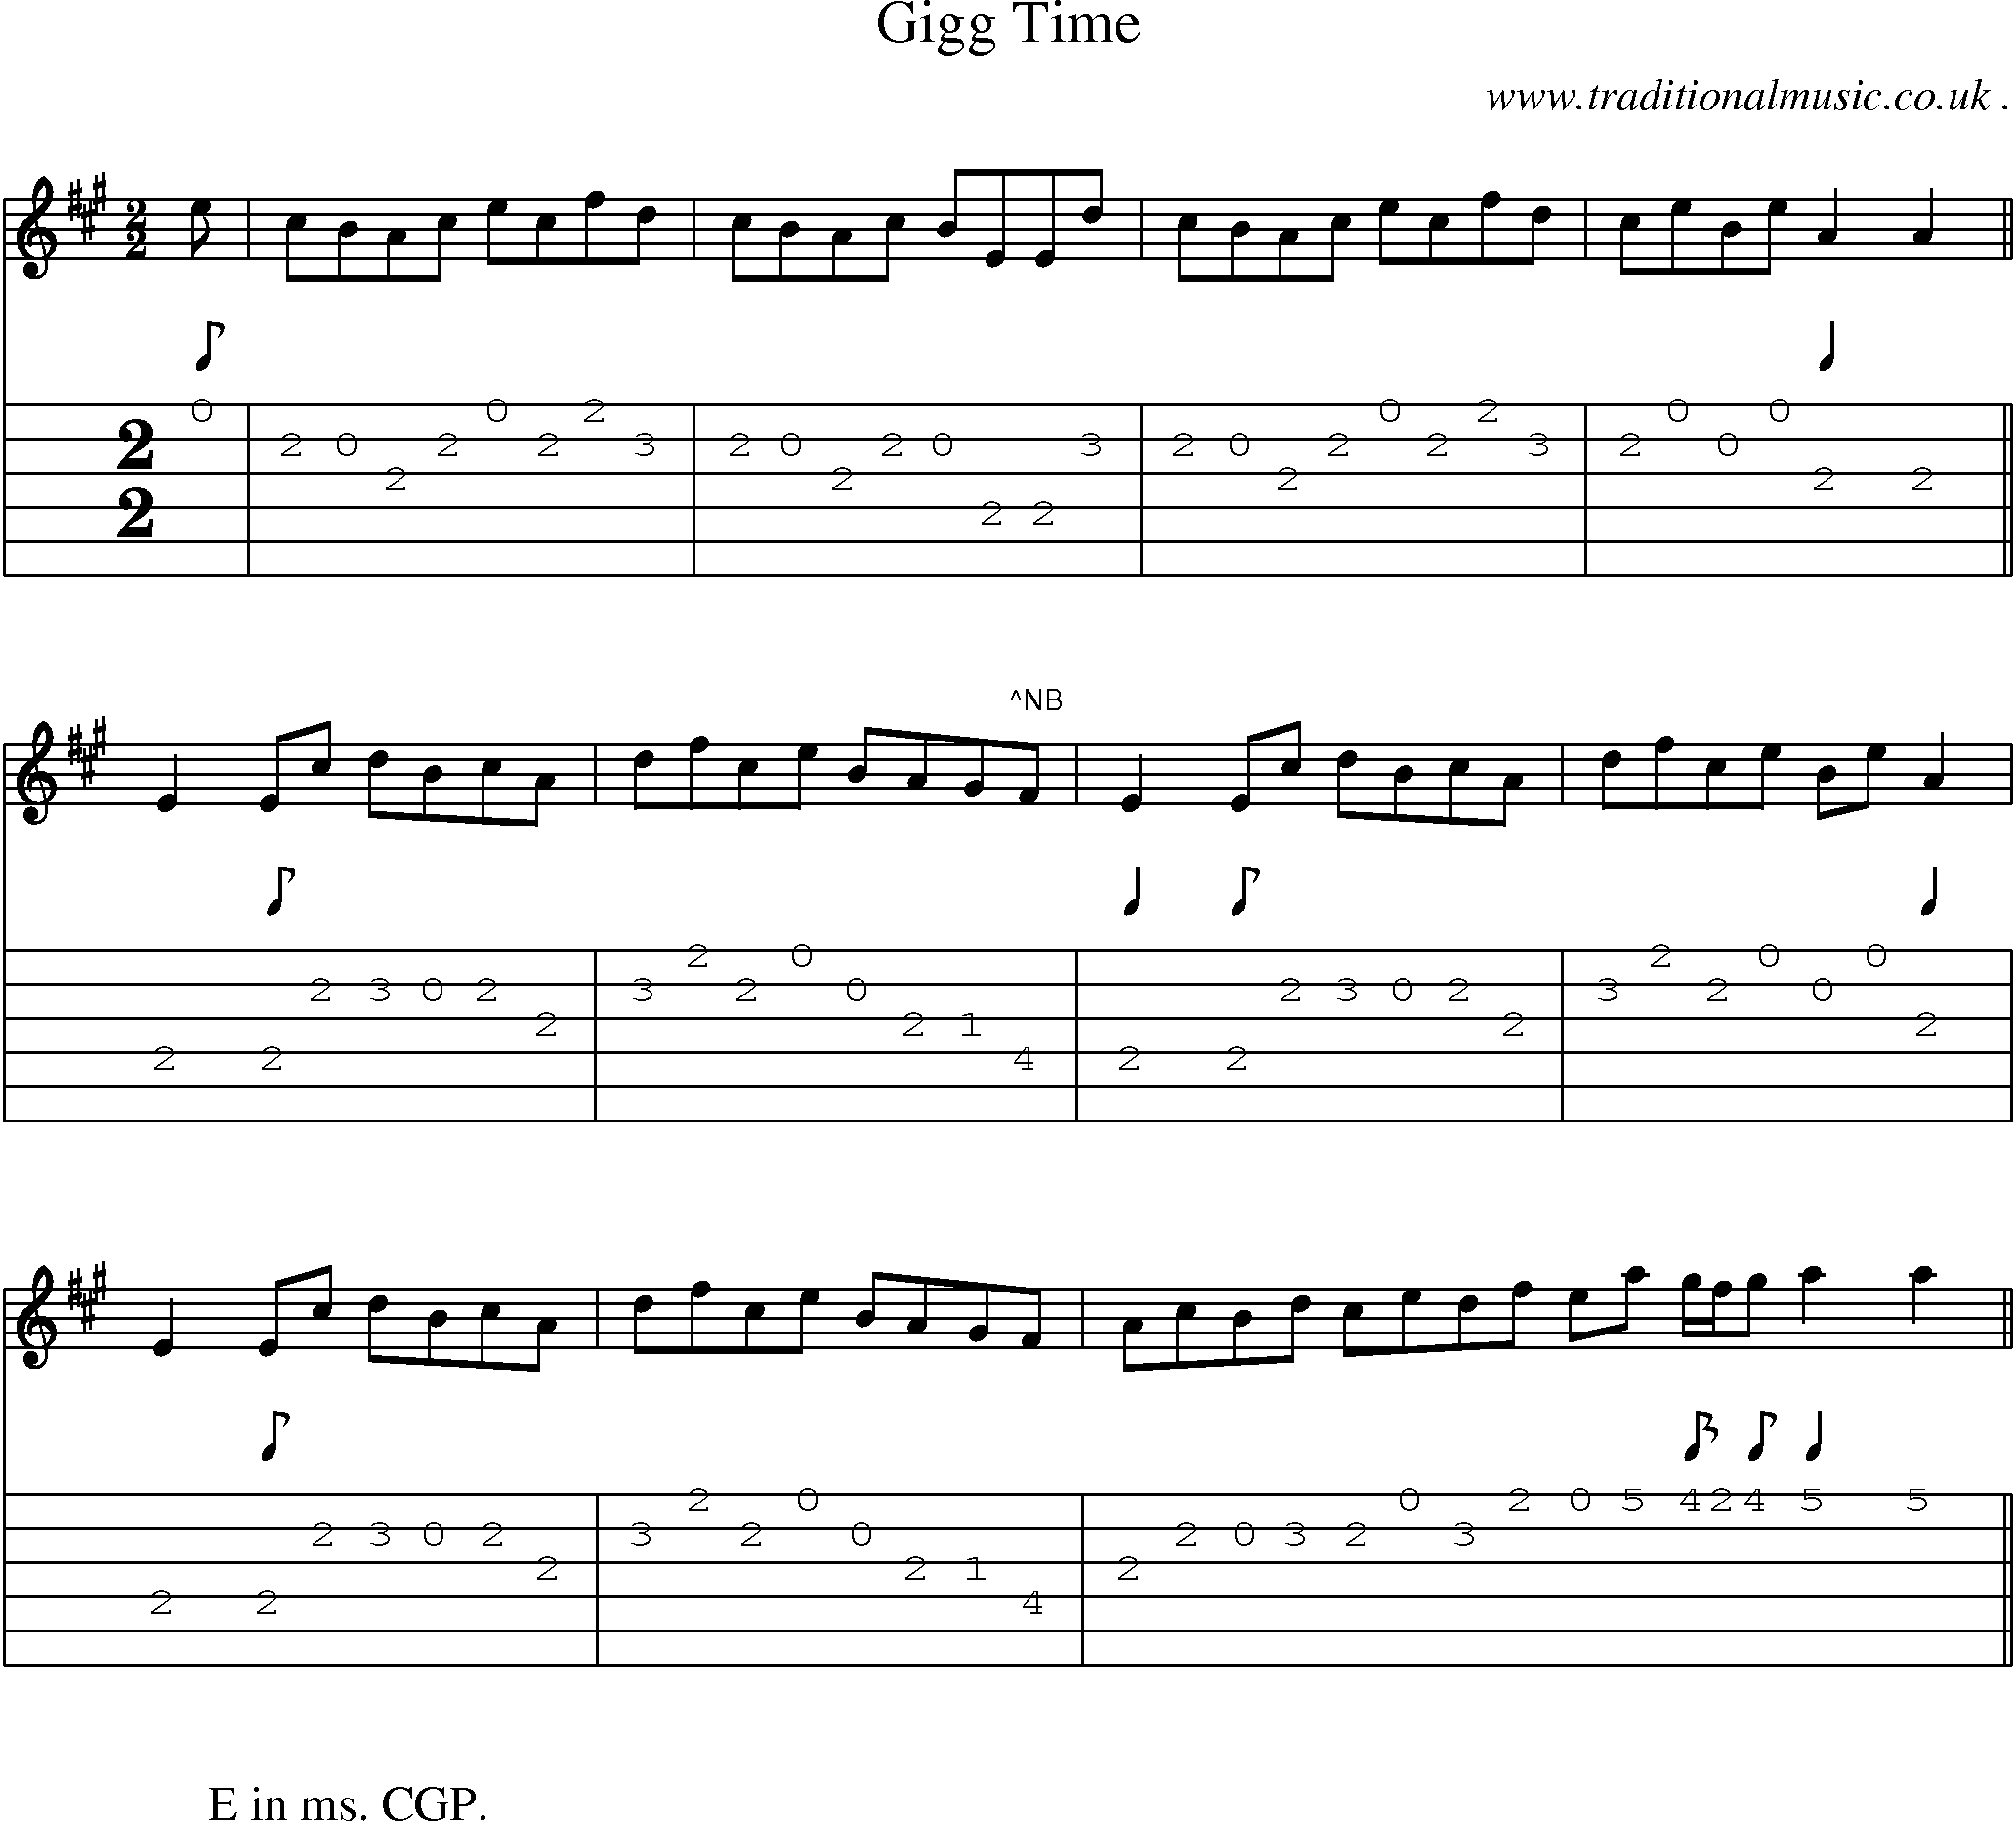 Sheet-Music and Guitar Tabs for Gigg Time